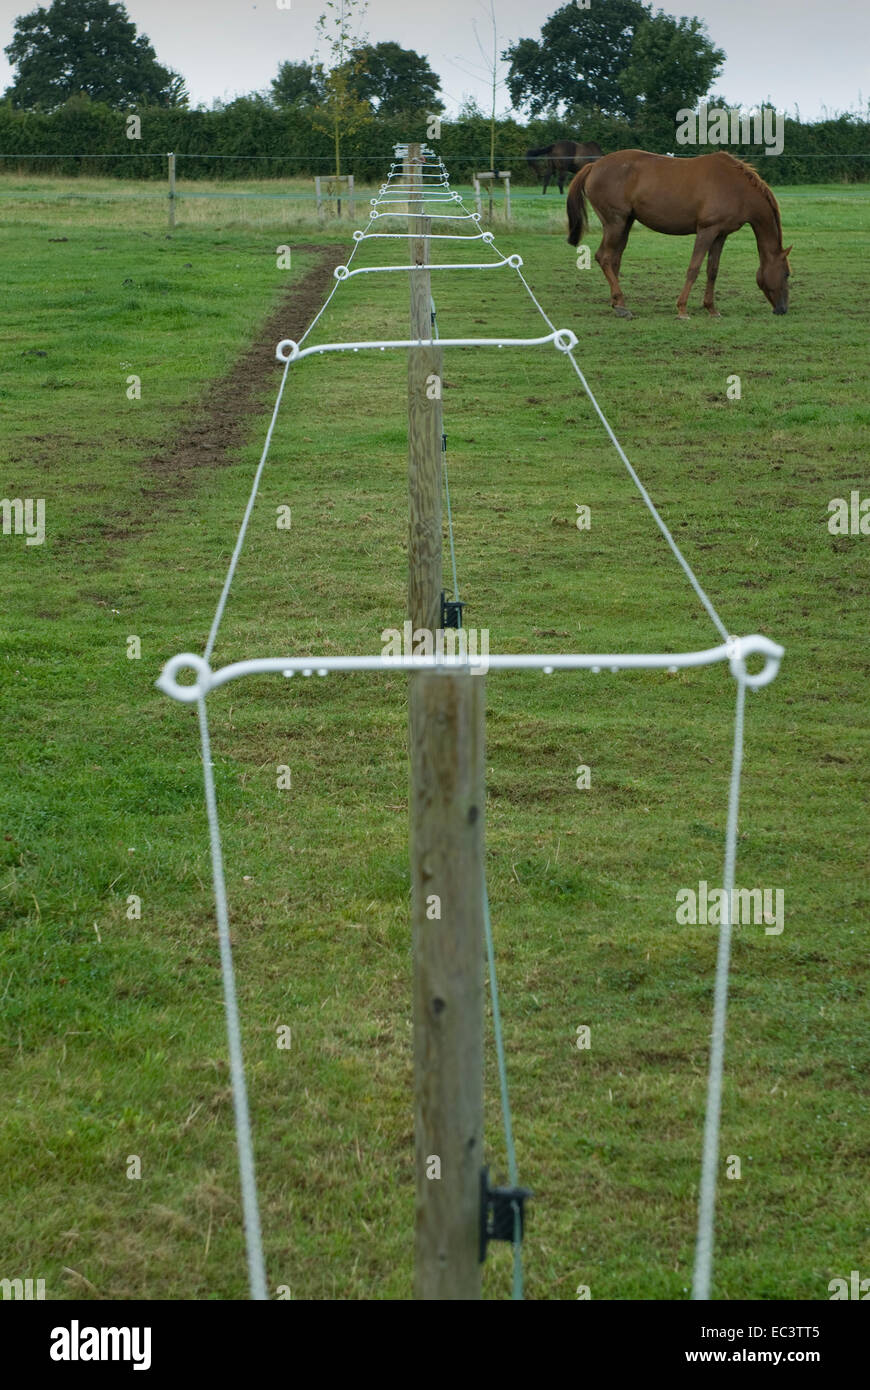 Electric fence in horse paddock Stock Photo